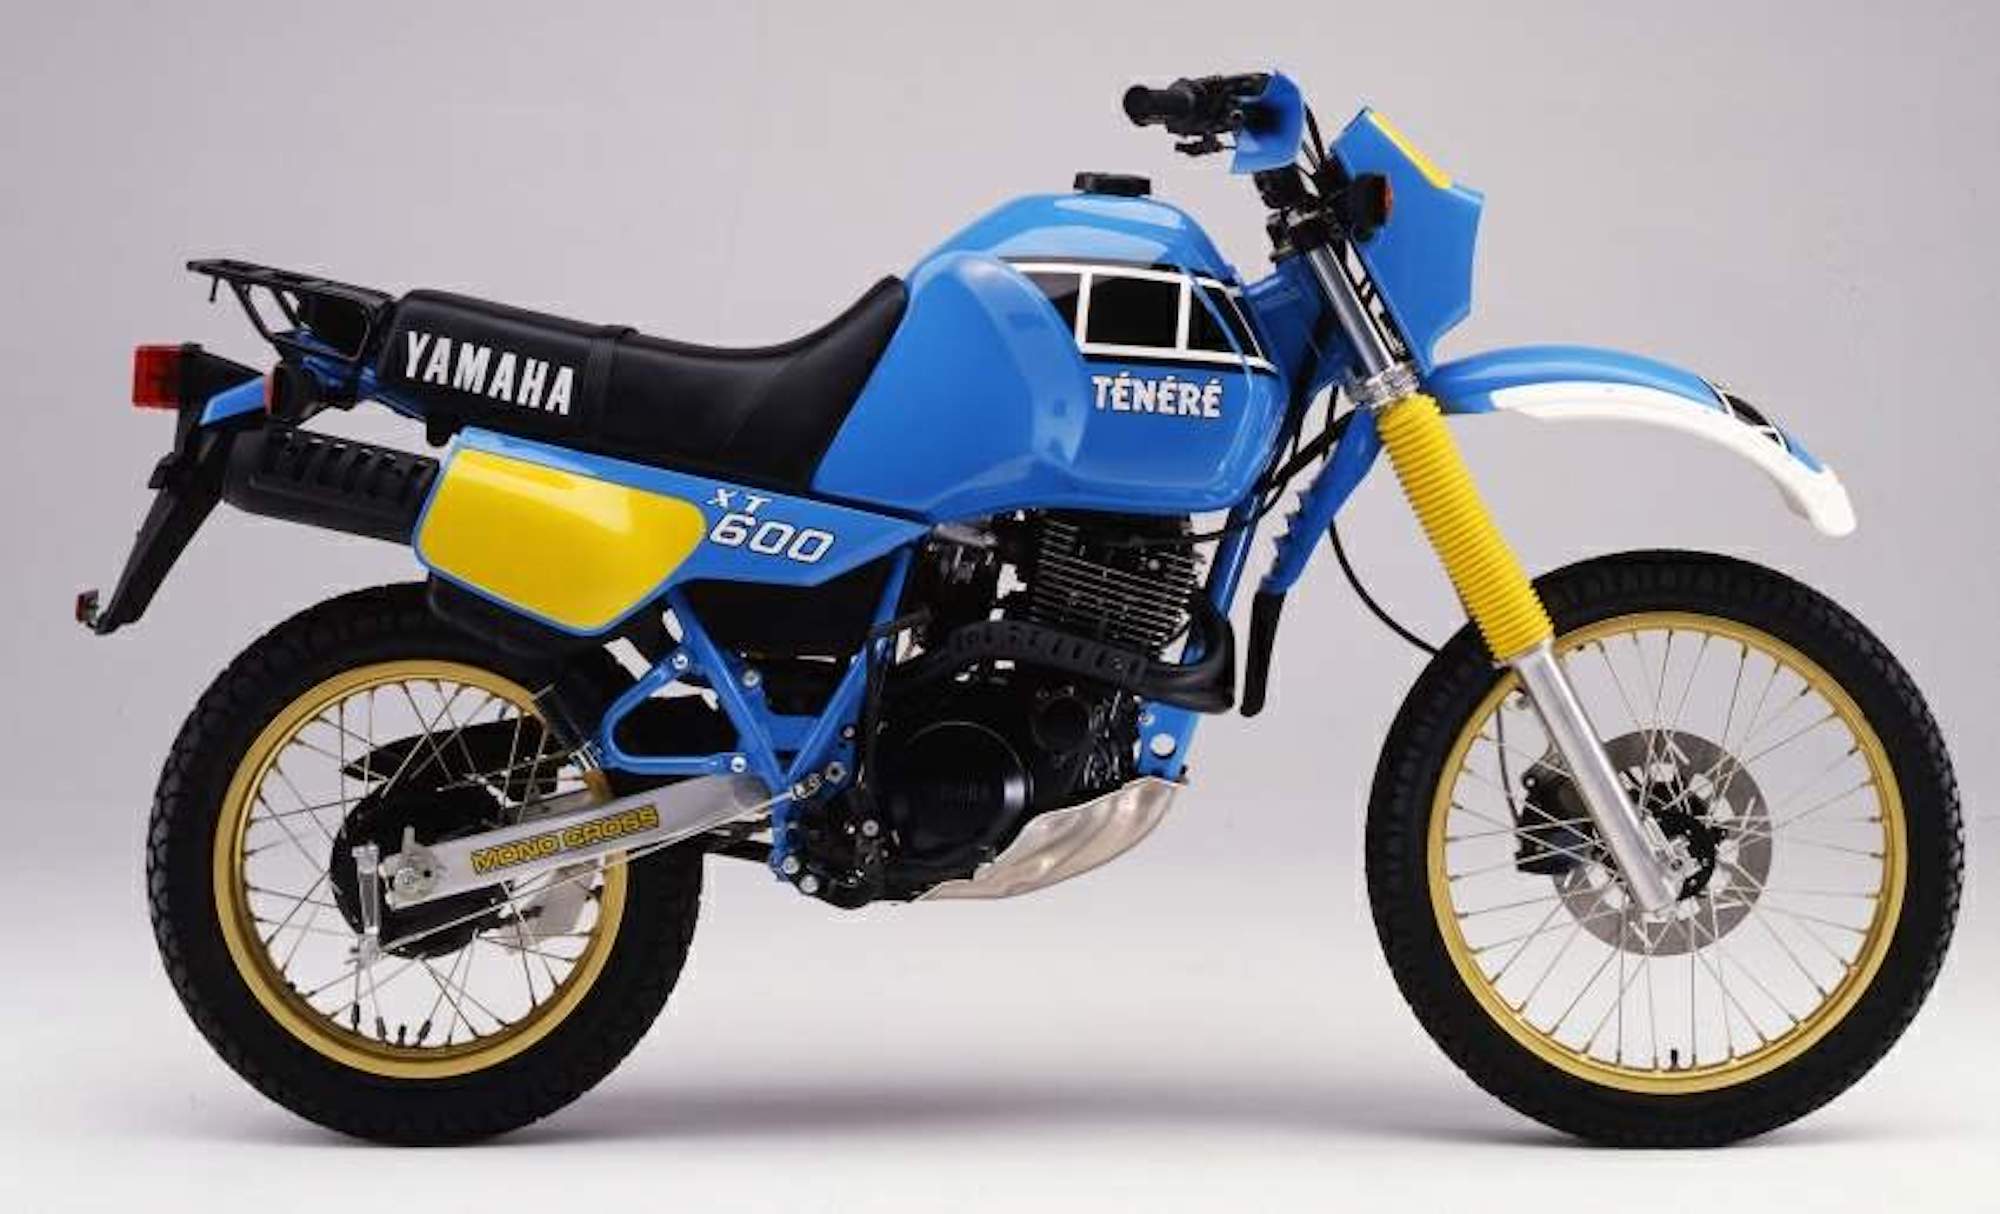 Yammie's very first Ténéré: The 1983 XT 600 Teneré. Media sourced from Motorcycle Specs.